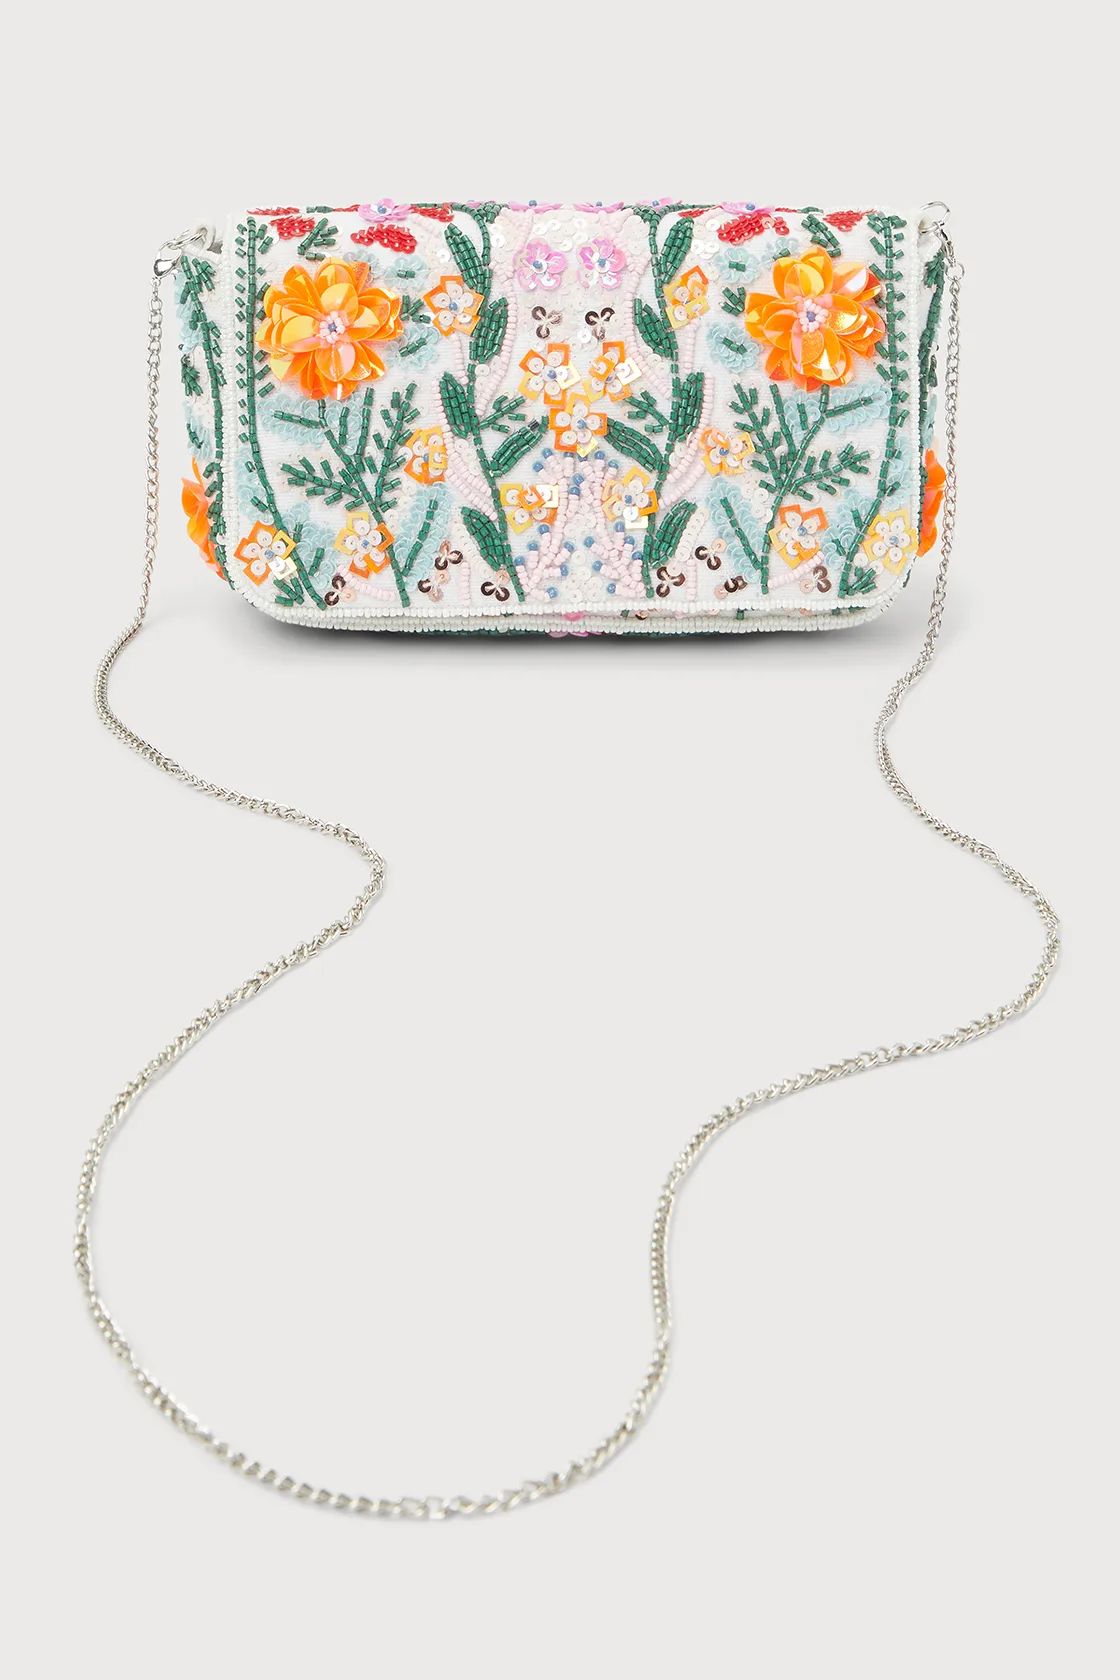 Brave Blooms White Multi Floral Beaded Sequin Clutch | Lulus